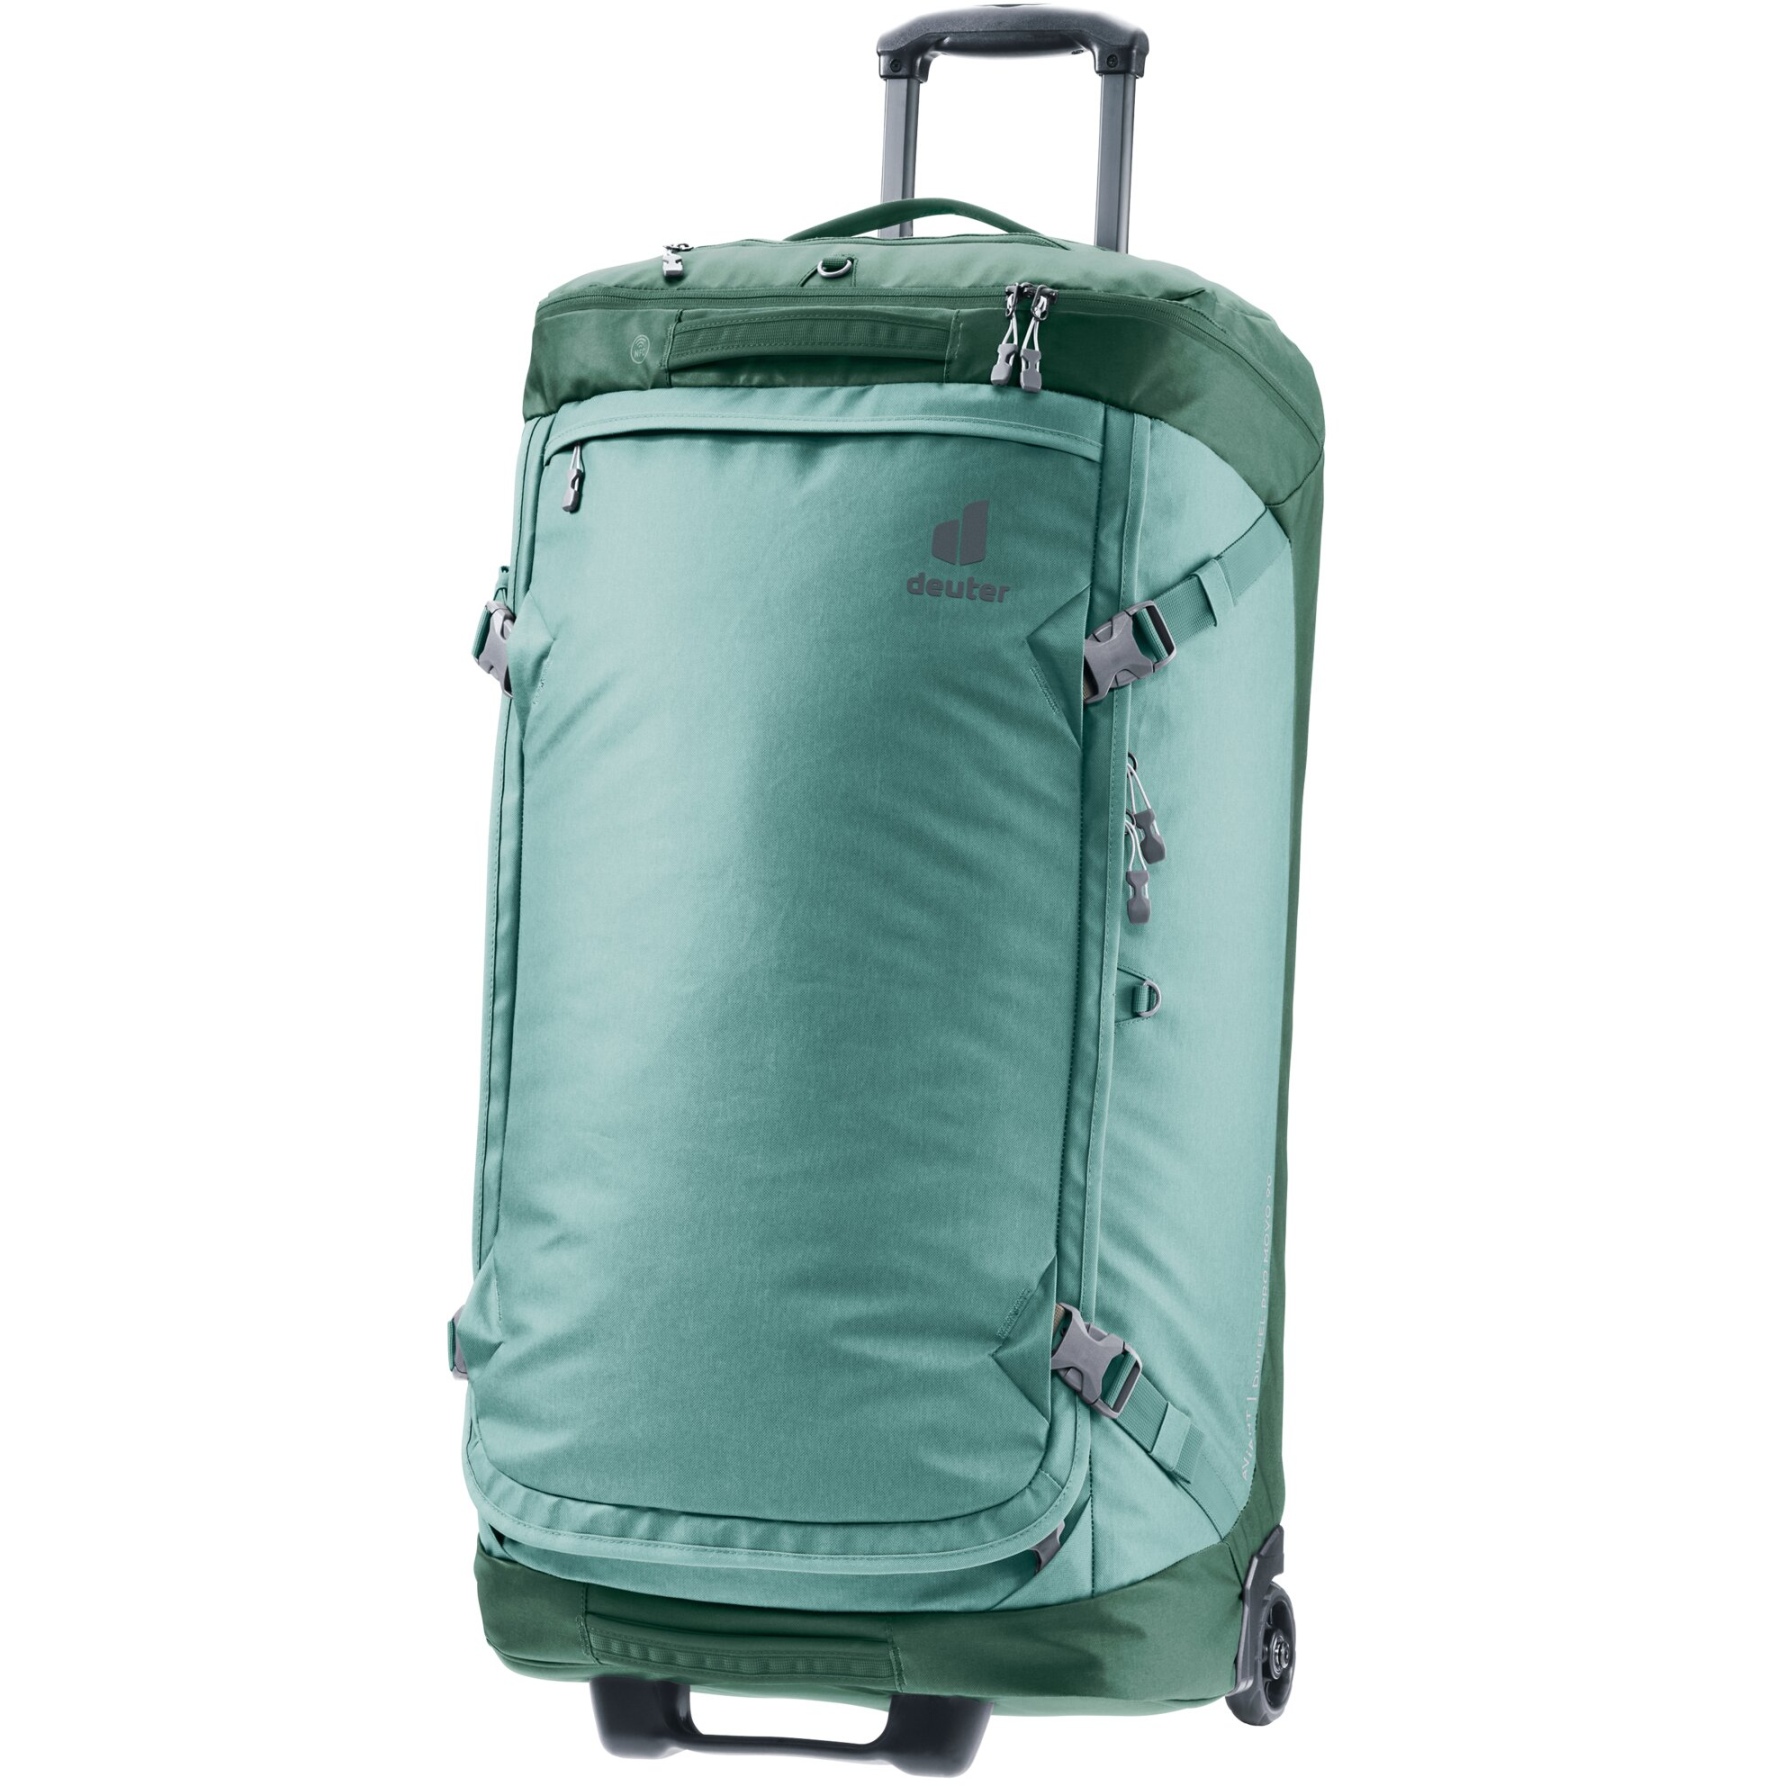 Picture of Deuter AViANT Duffel Pro Movo 90 Trolley - jade-seagreen